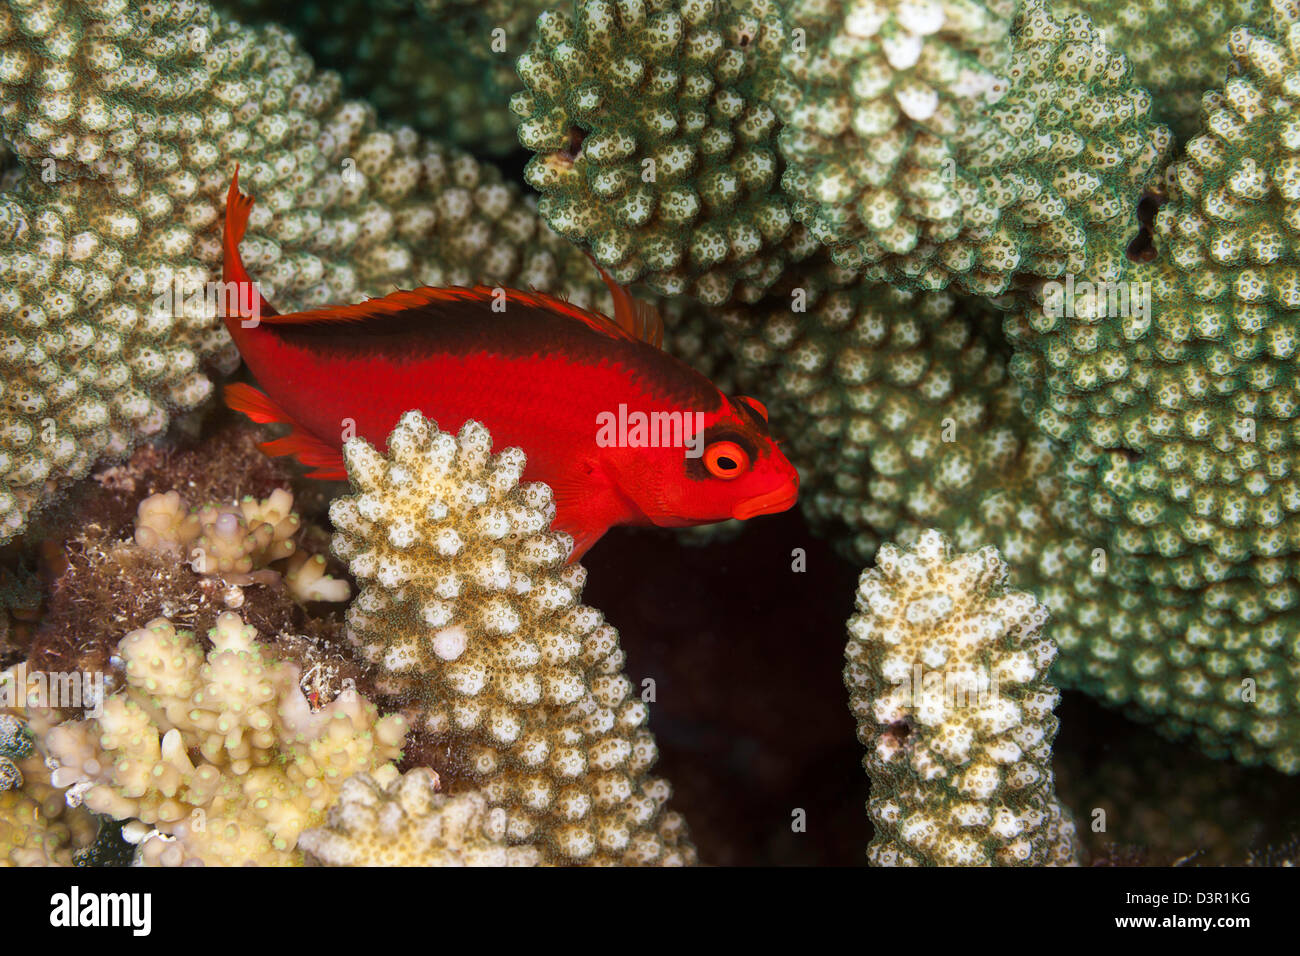 The flame hawkfish, Neocirrhites armatus, is unusual to find on the reefs in Fiji where this individual was photographed. Stock Photo